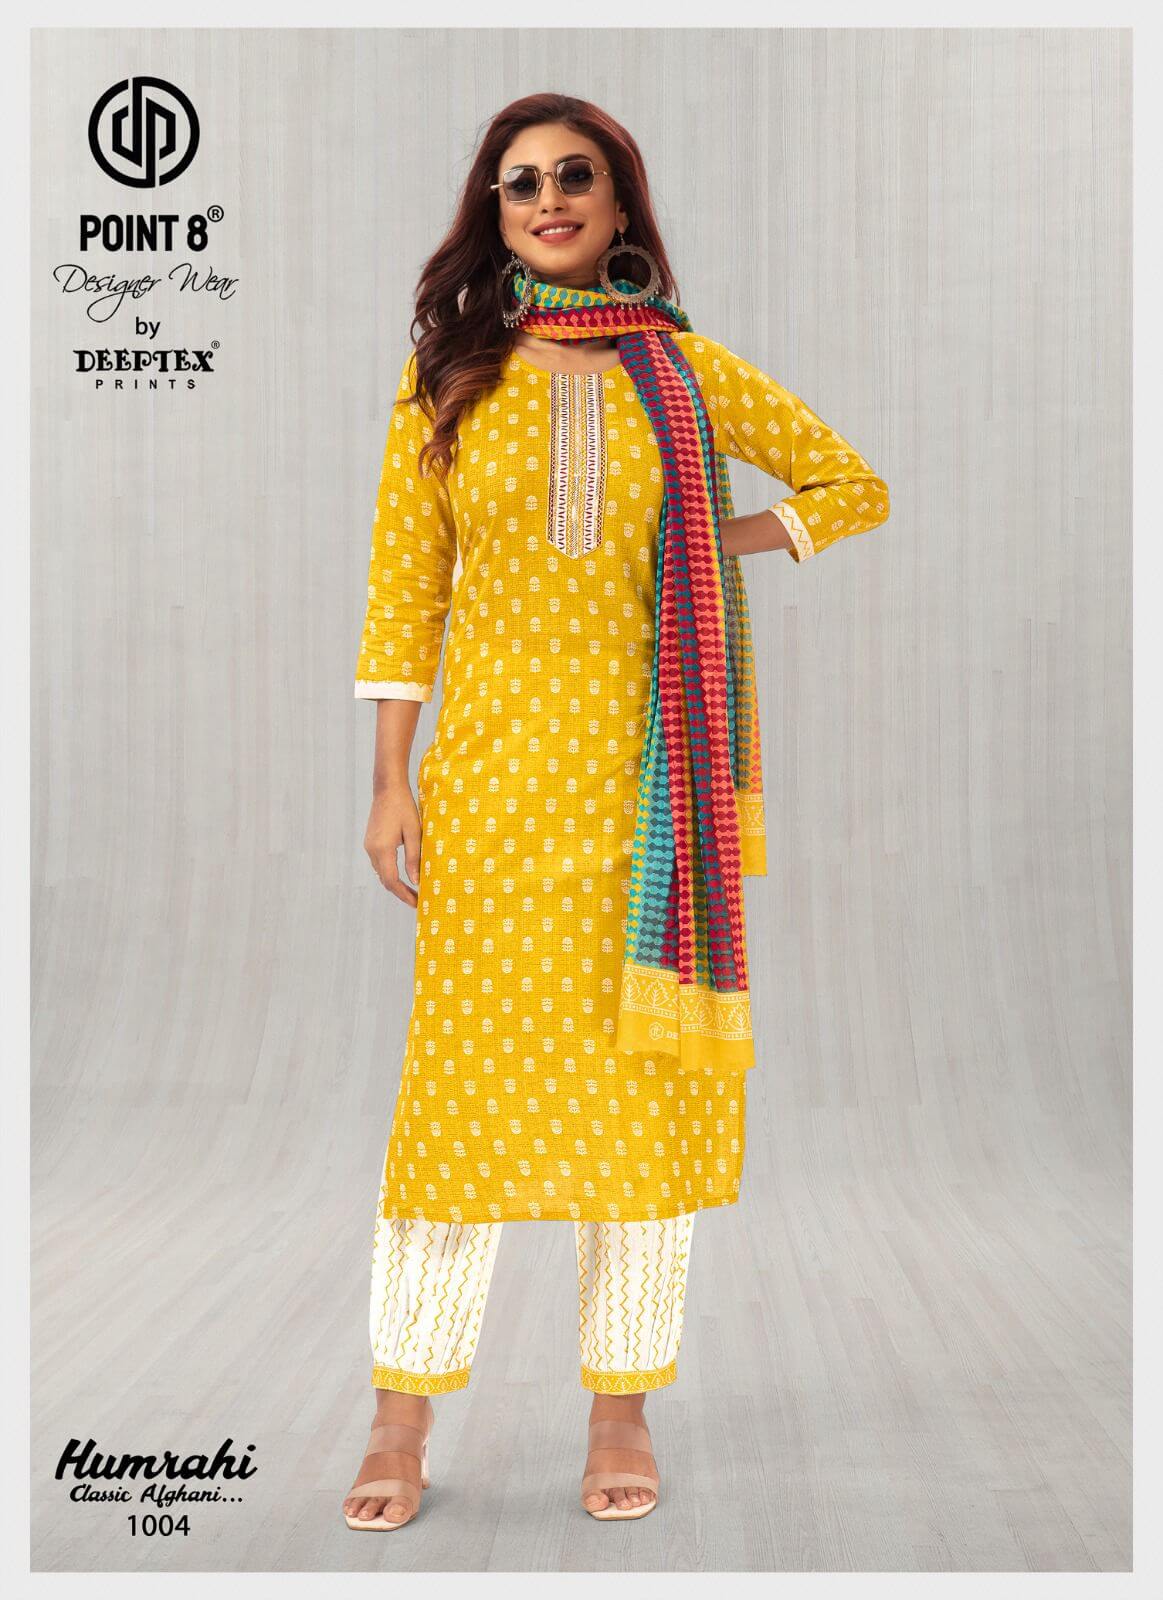 Deeptex Point 8 Humrahi vol 1 collection 1